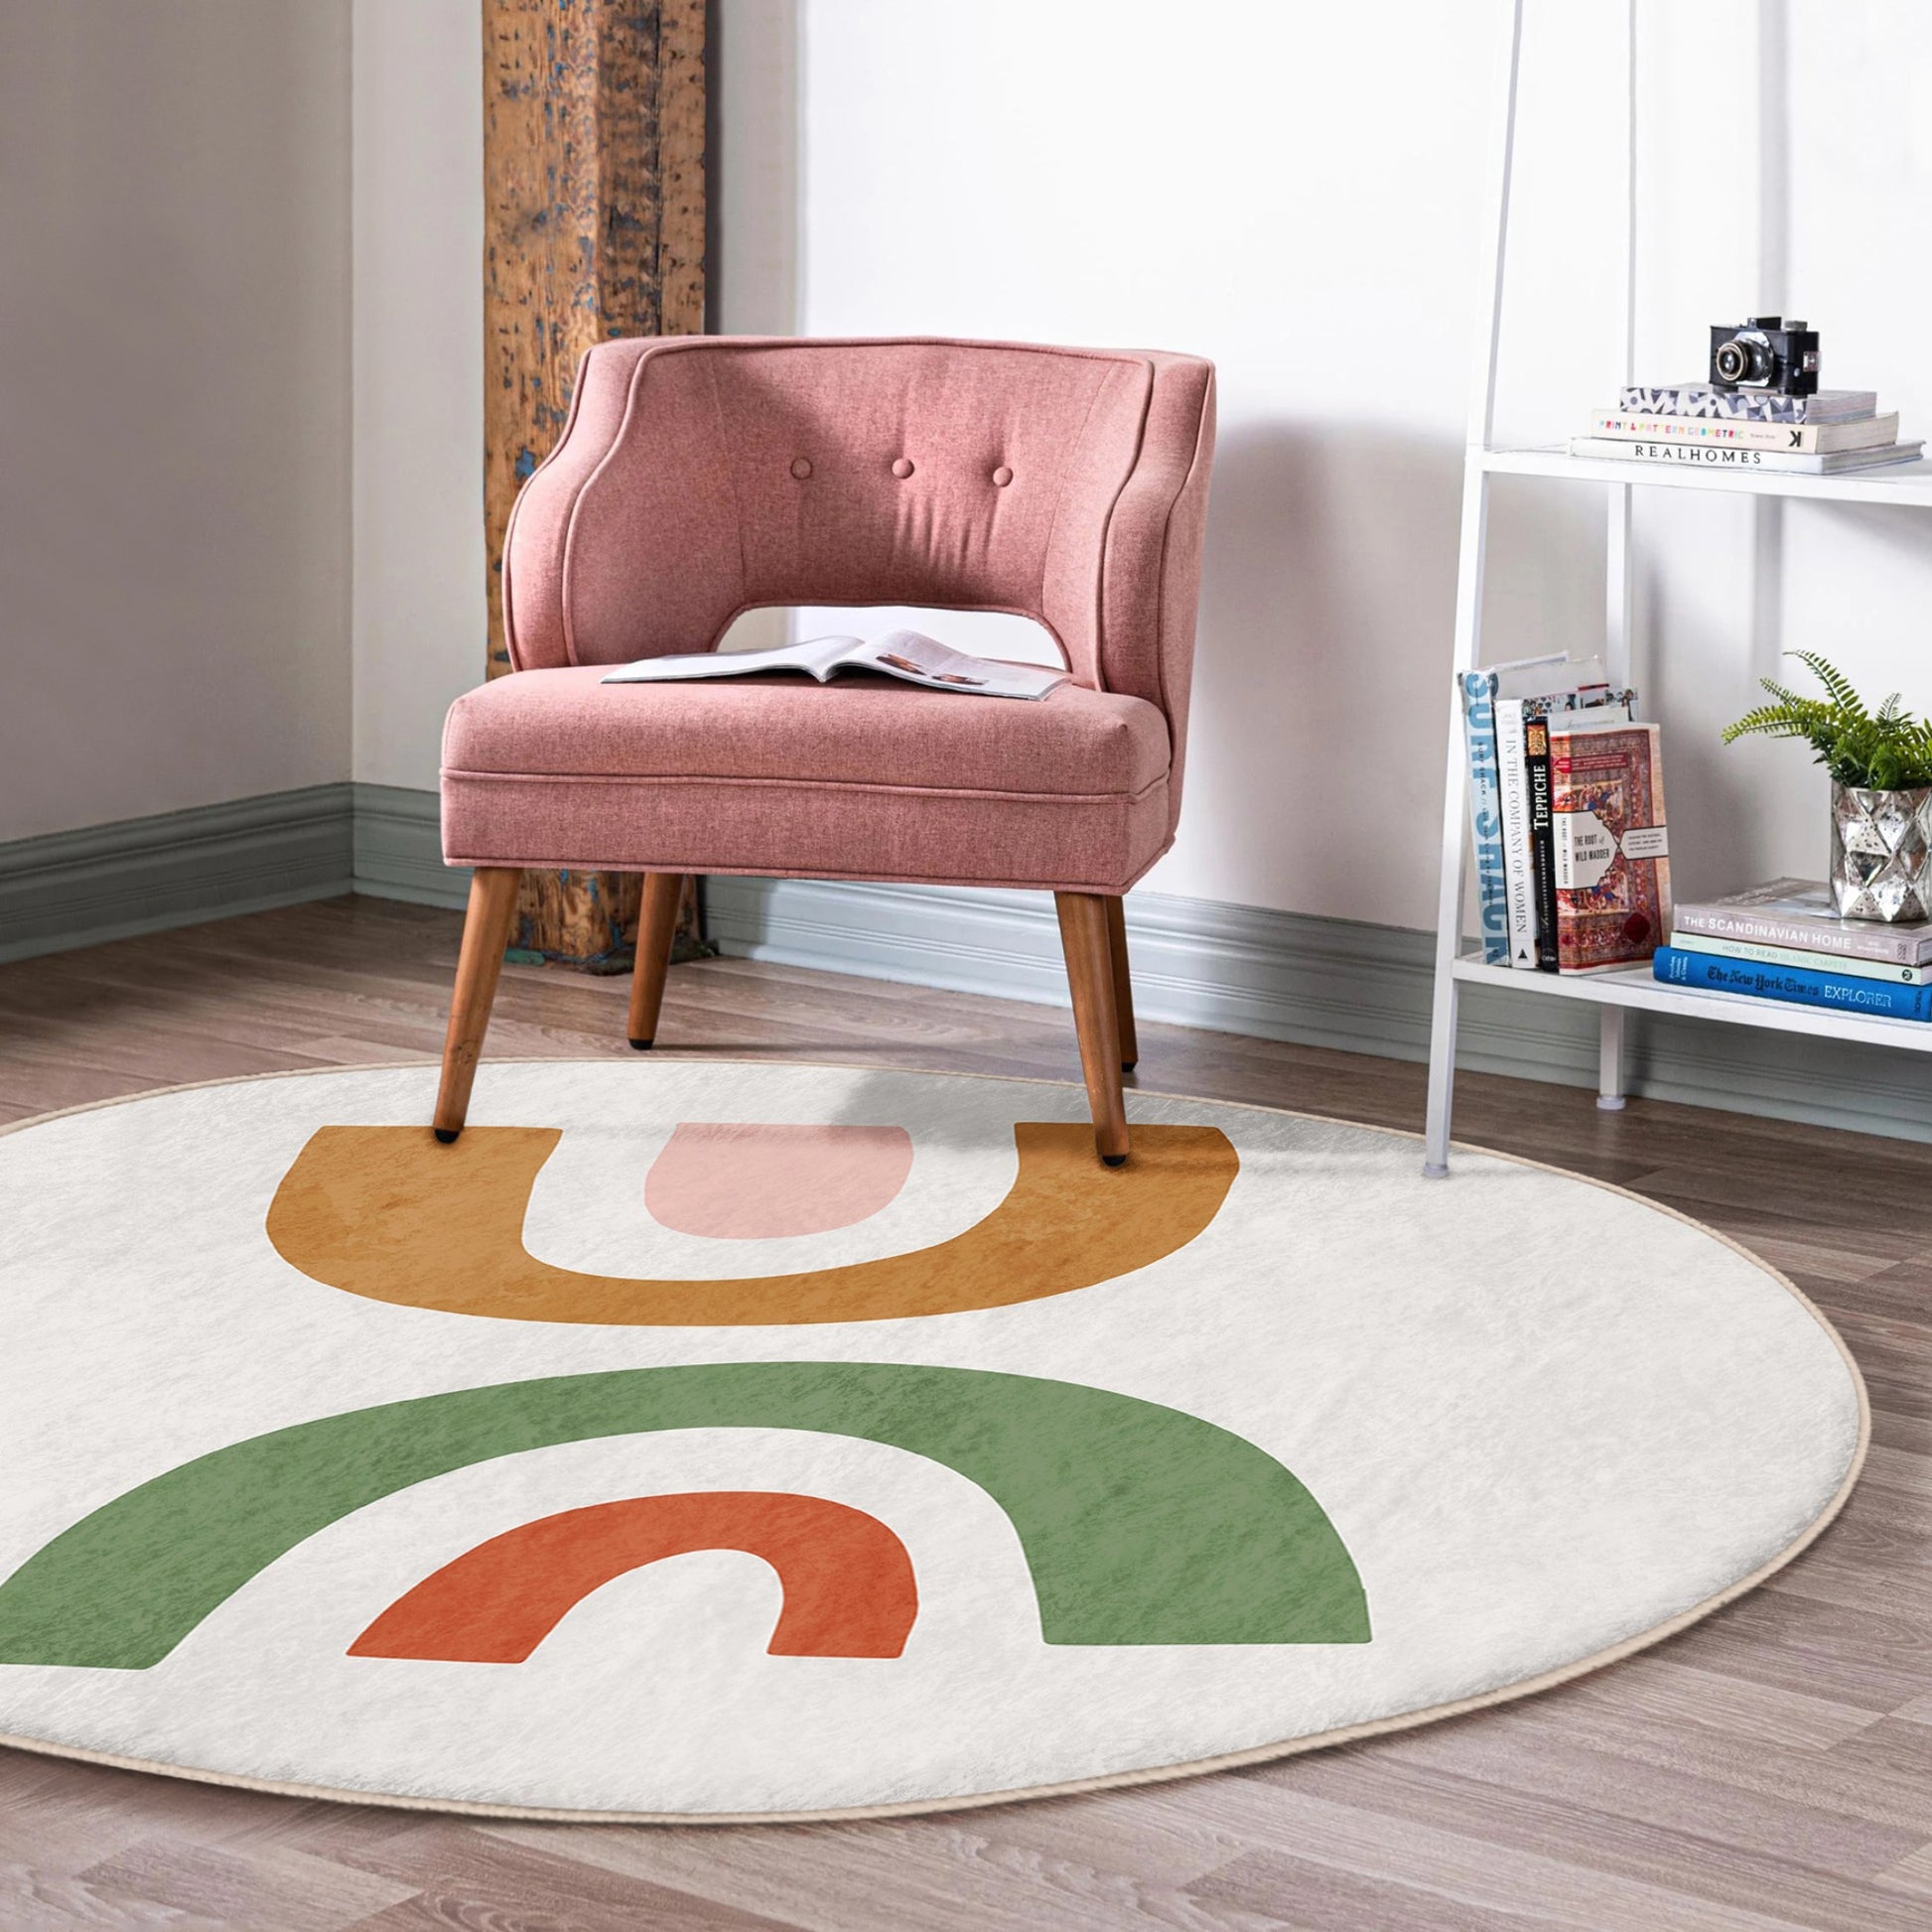 Round Patterned Floor Rug - Stylish Home Accent